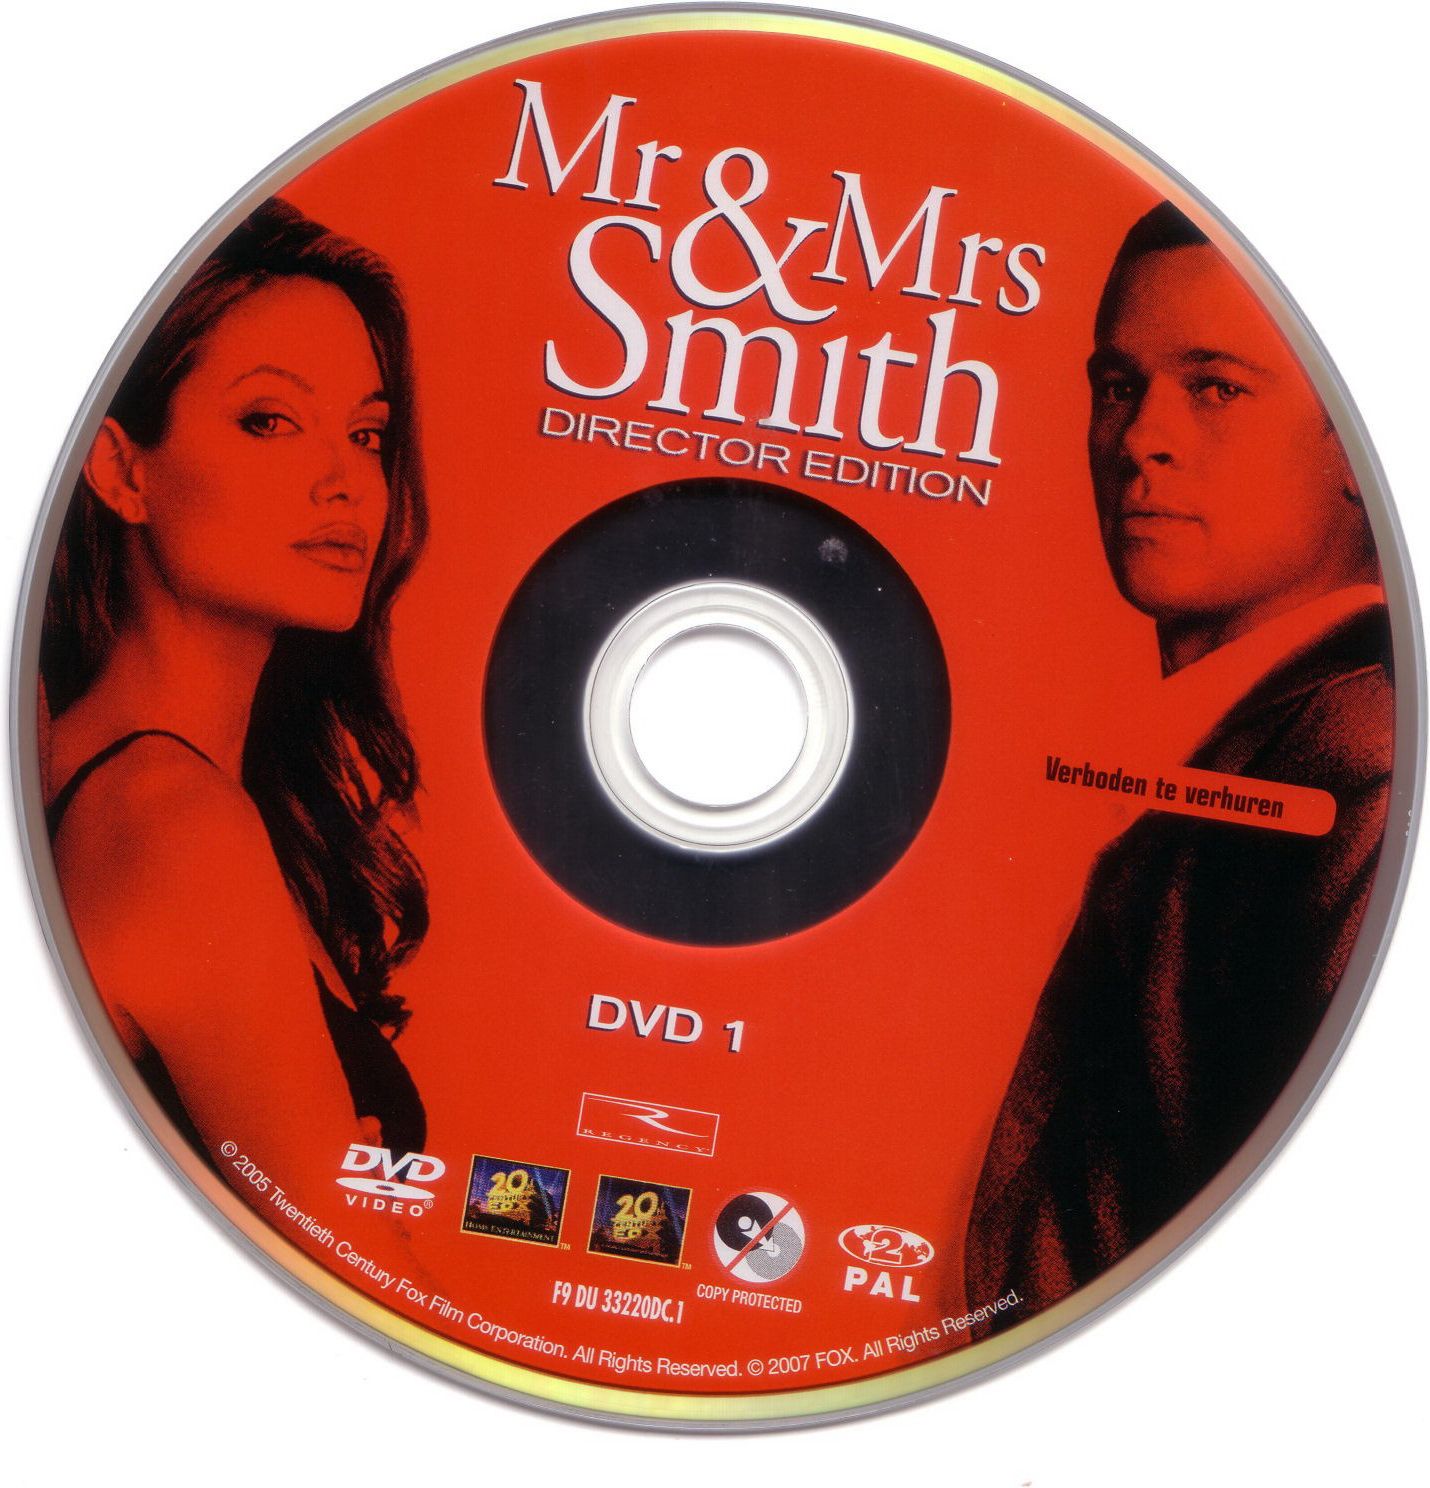 Mr And Mrs Smith Dvd Cd1 Dvd Covers Cover Century Over 1 000 000 Album Art Covers For Free